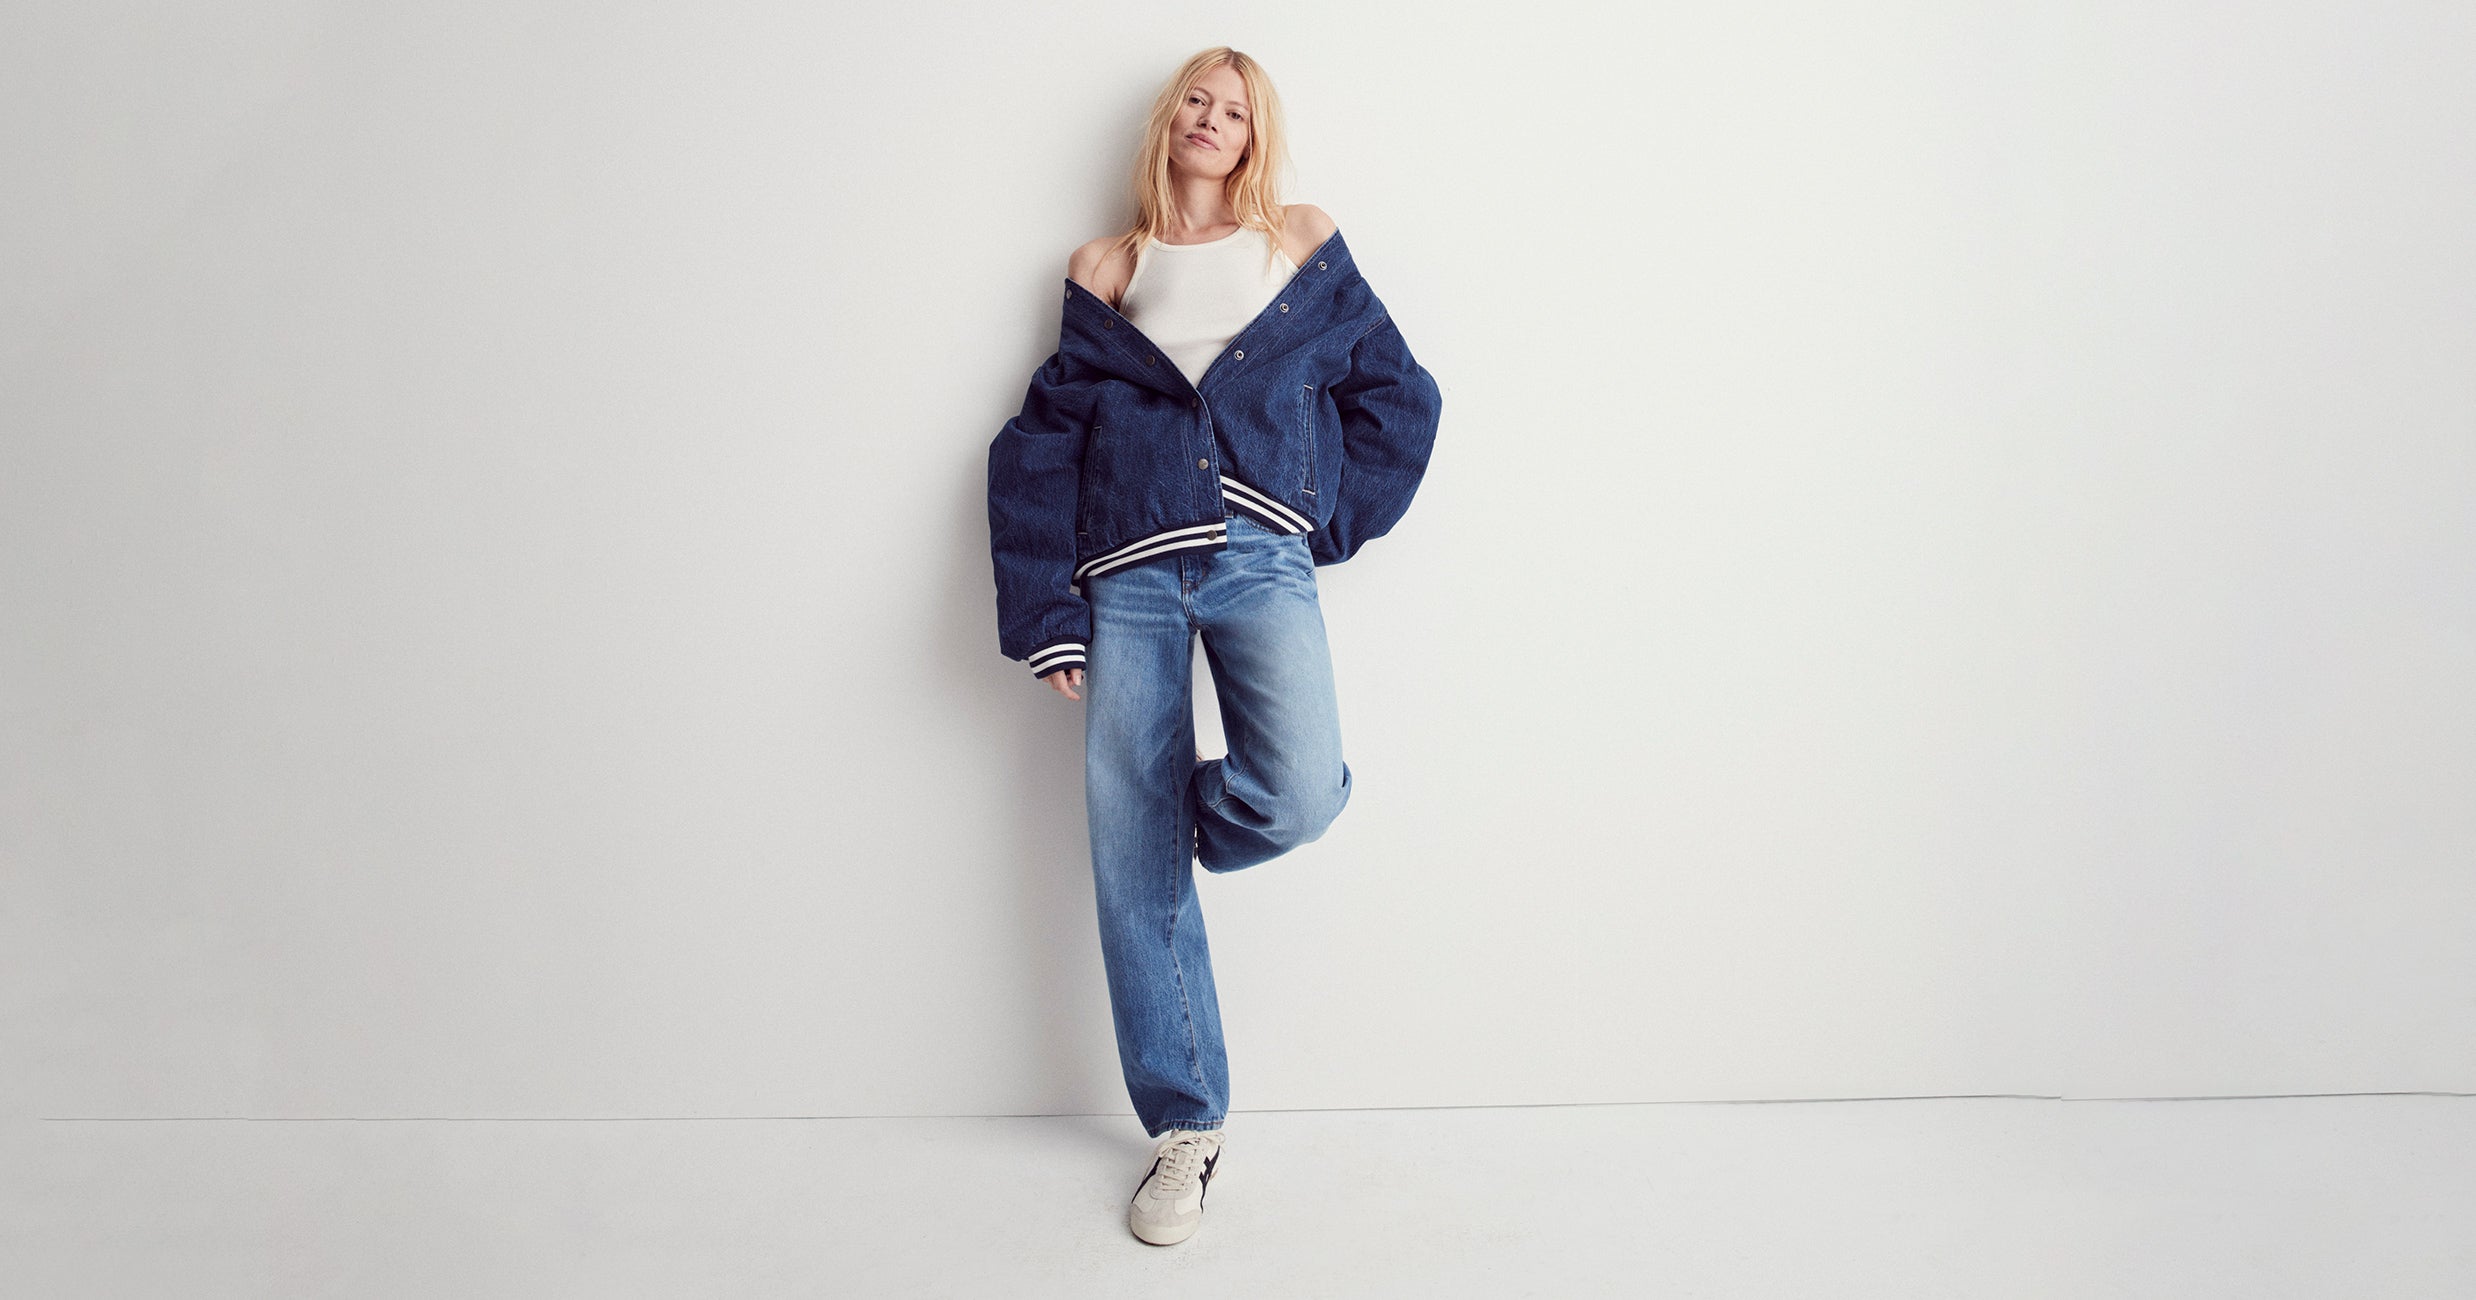 Madewell’s New Spring Denim Is A Love Letter To The ’90s